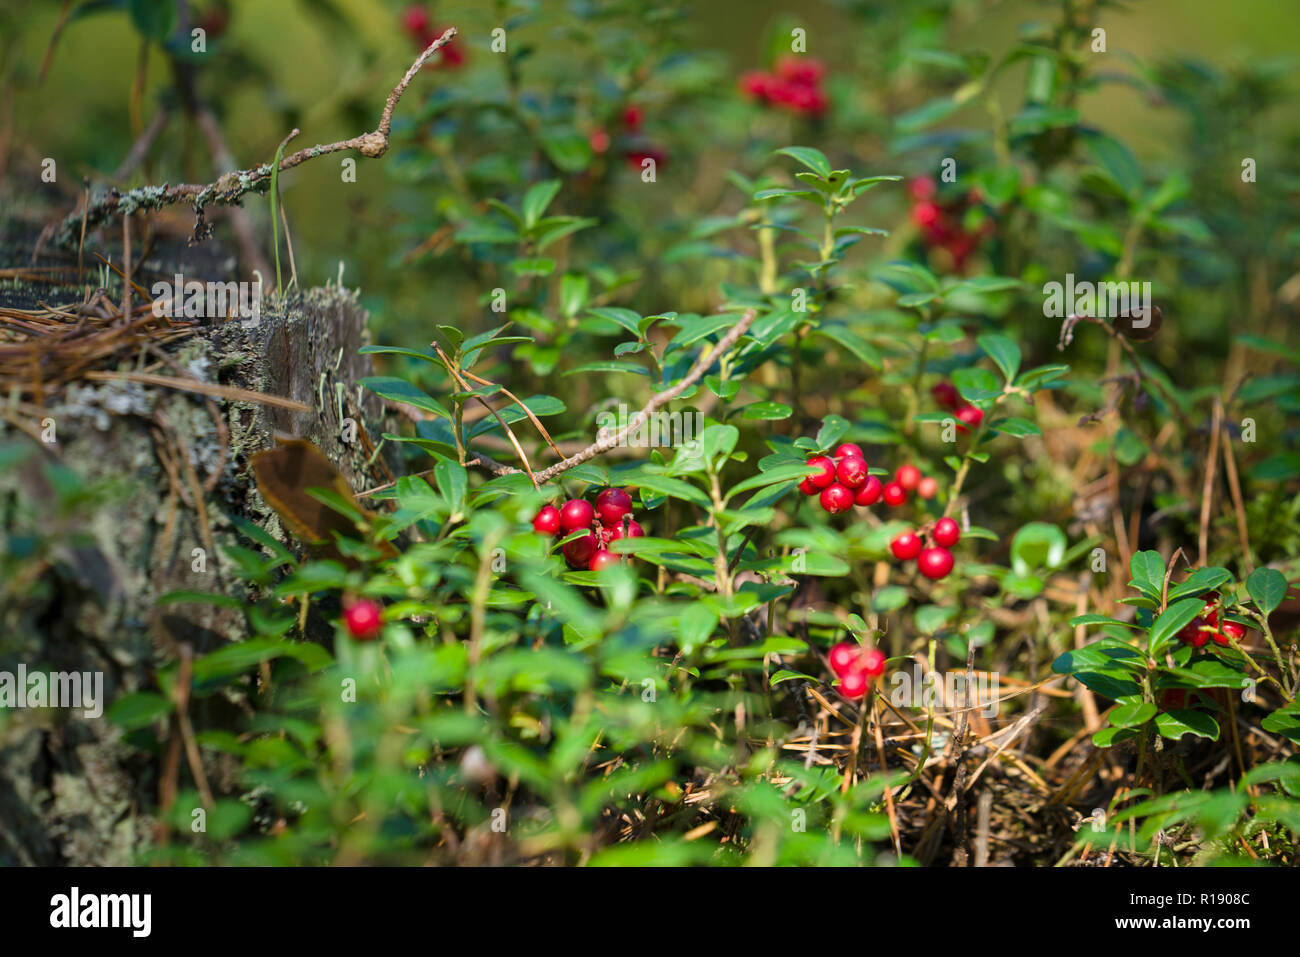 Cowberries in forest over green moss Stock Photo